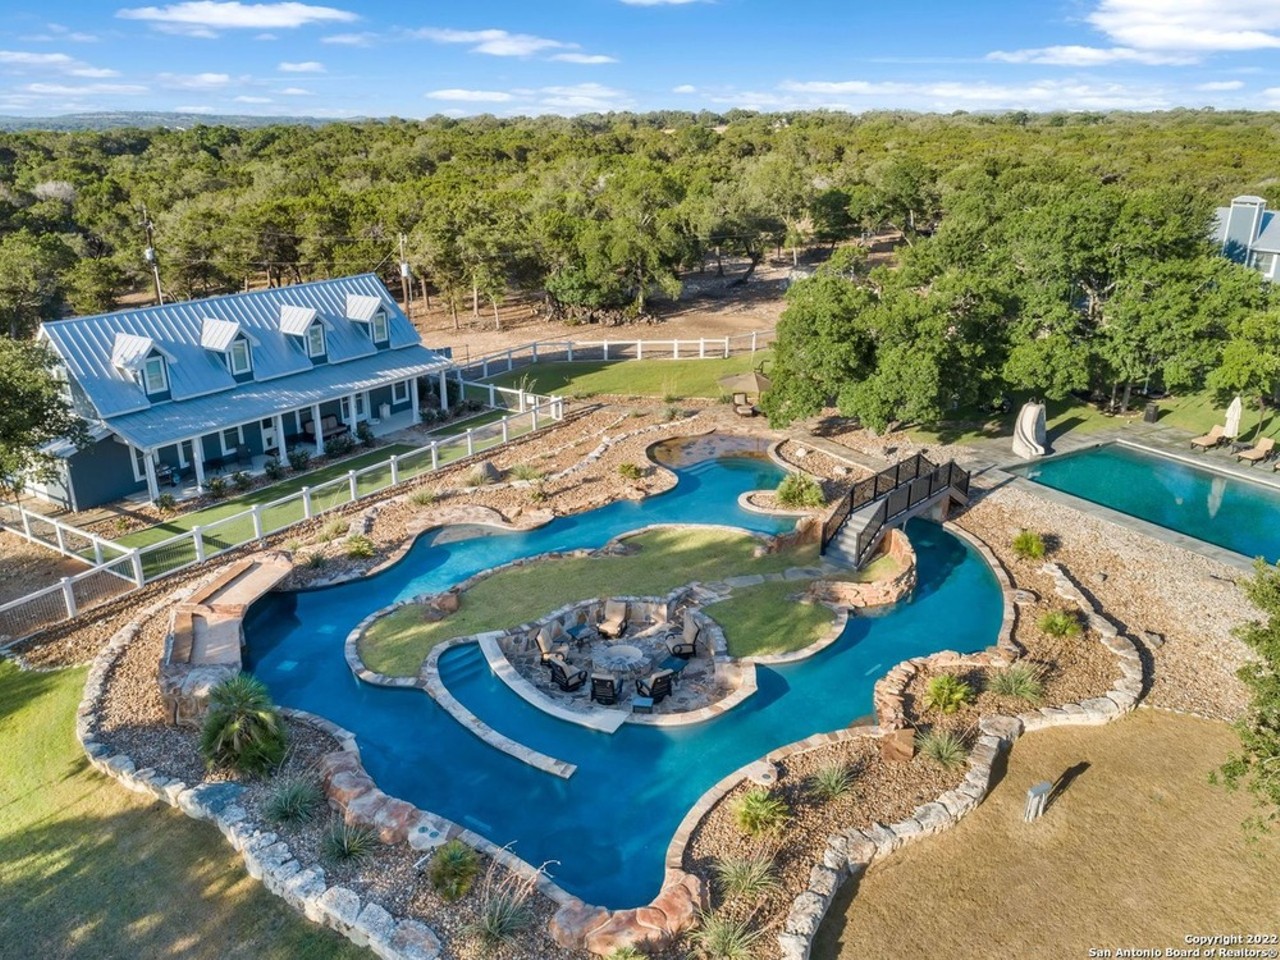 A San Antonio-area house with its own private lazy river underwent a $1.5 million price cut